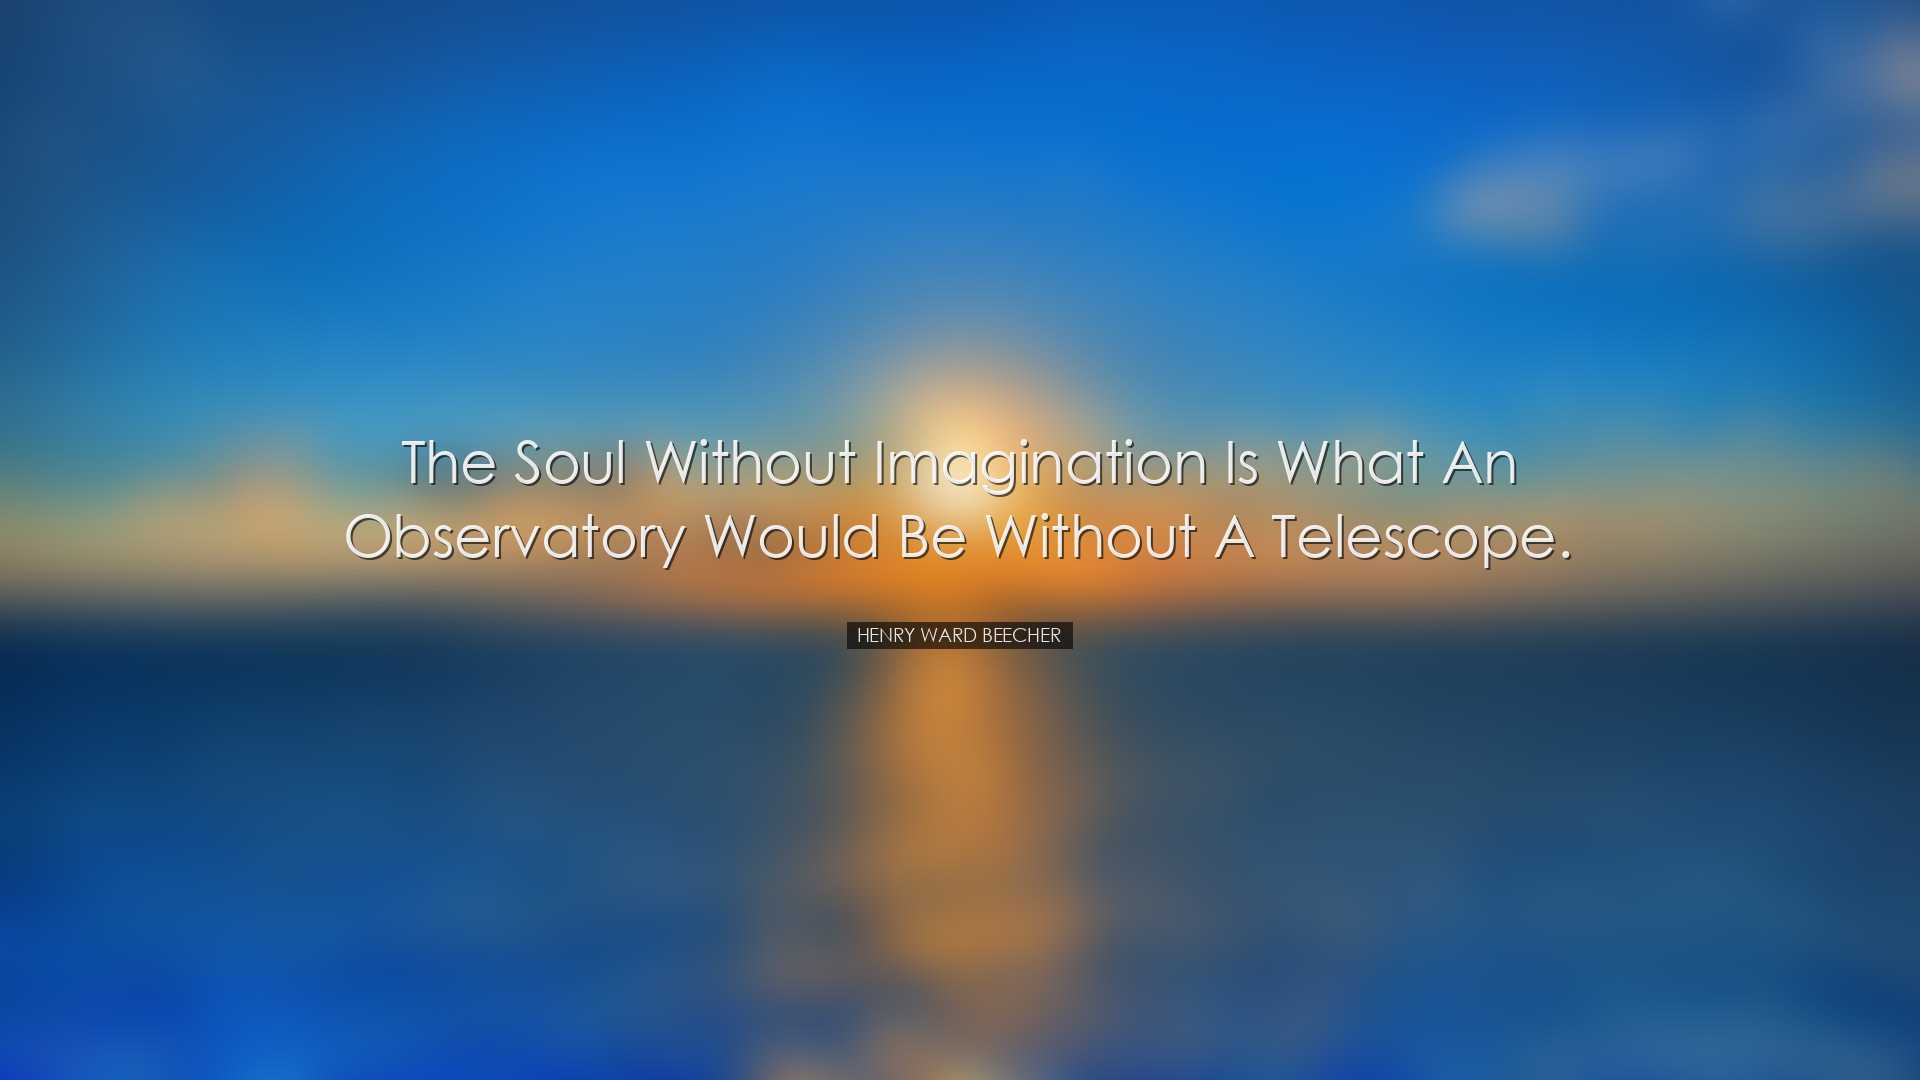 The soul without imagination is what an observatory would be witho